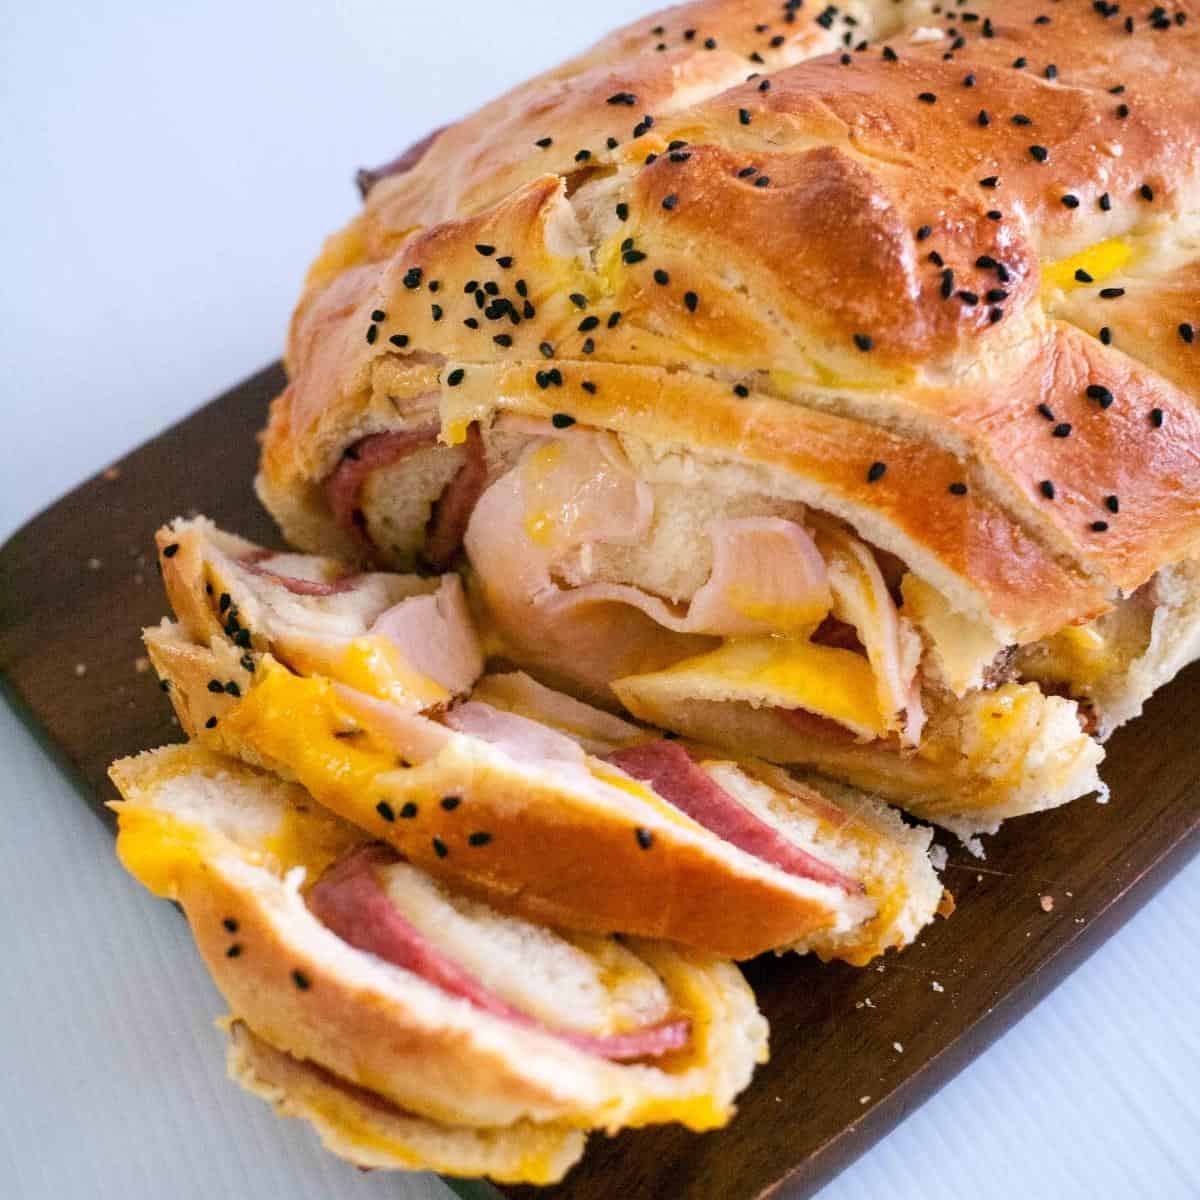 Sliced bread with ham and cheese on a wooden board.